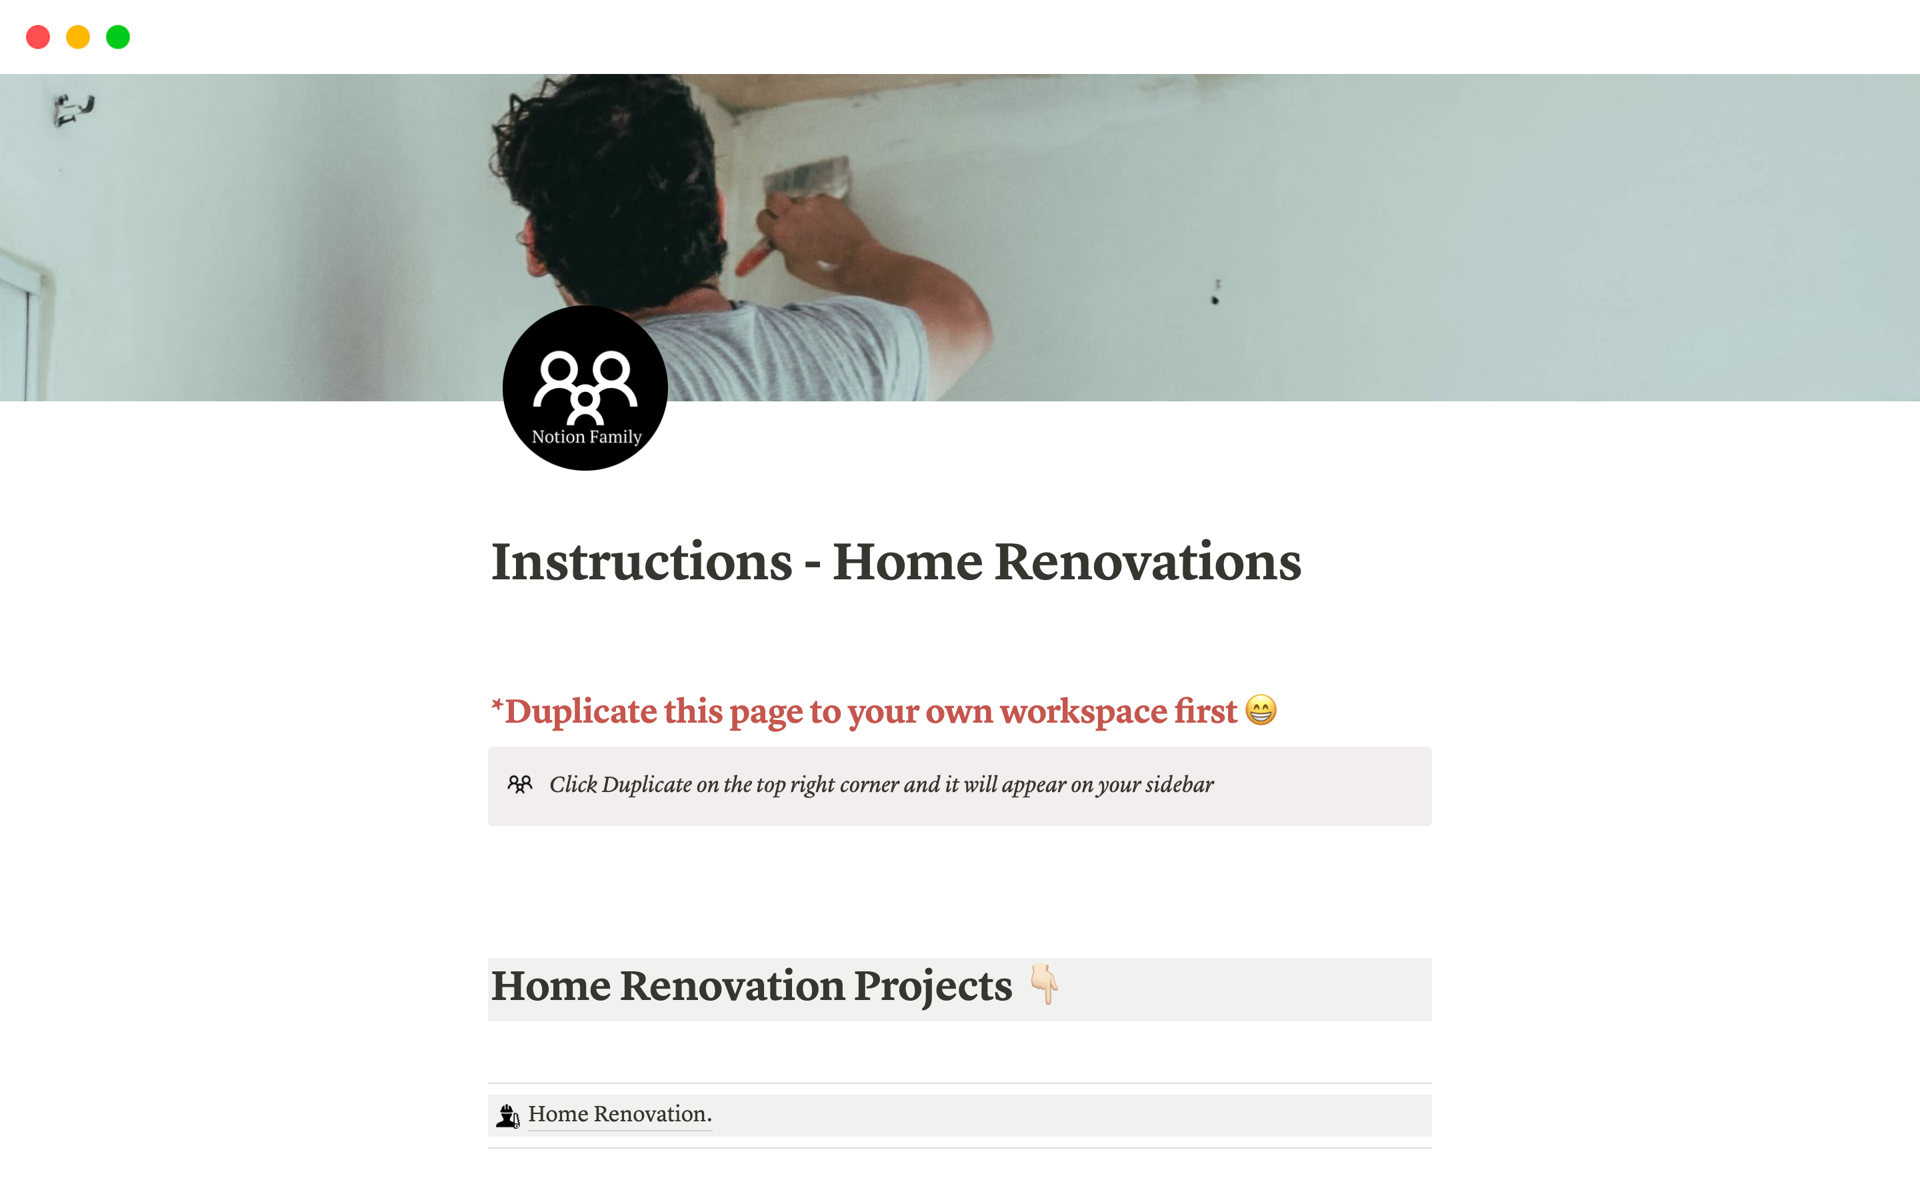 Manage all your home renovation projects, jobs, timeline, tradespeople, materials, budget, and shopping list, all in one place.